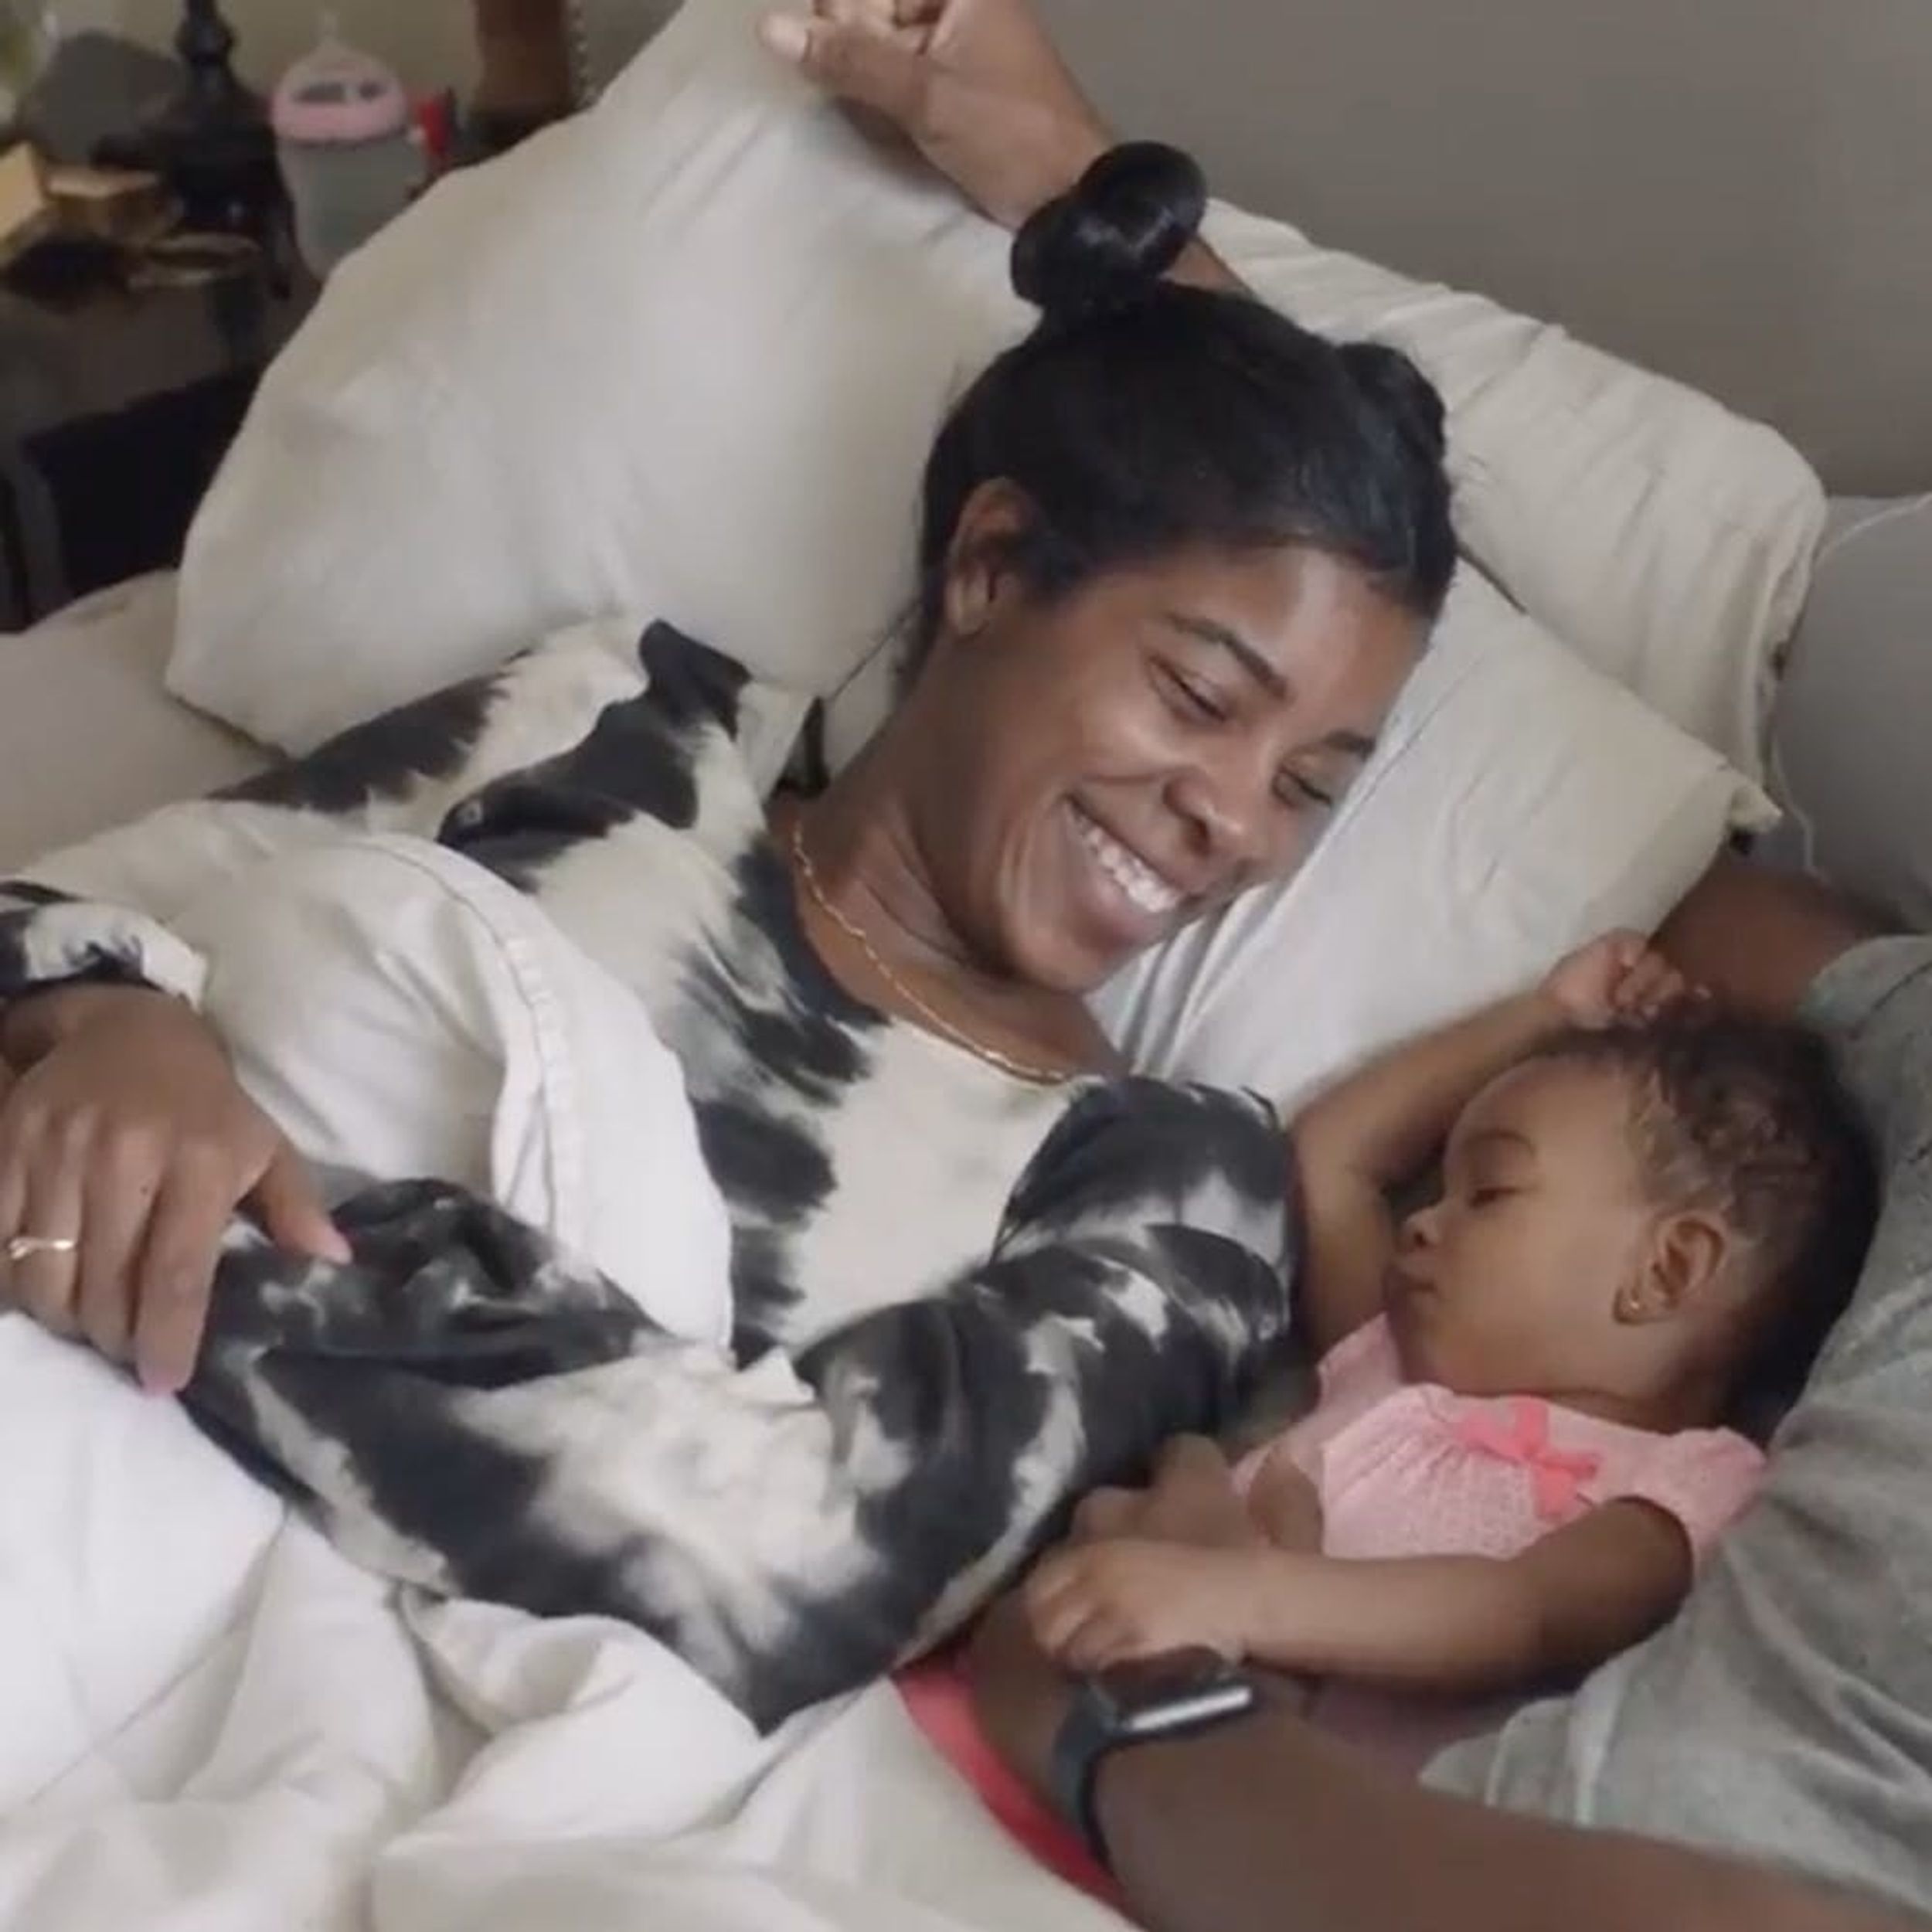 Worried You’re Not a Perfect Mom? Dove’s New Video Wants to Help With That